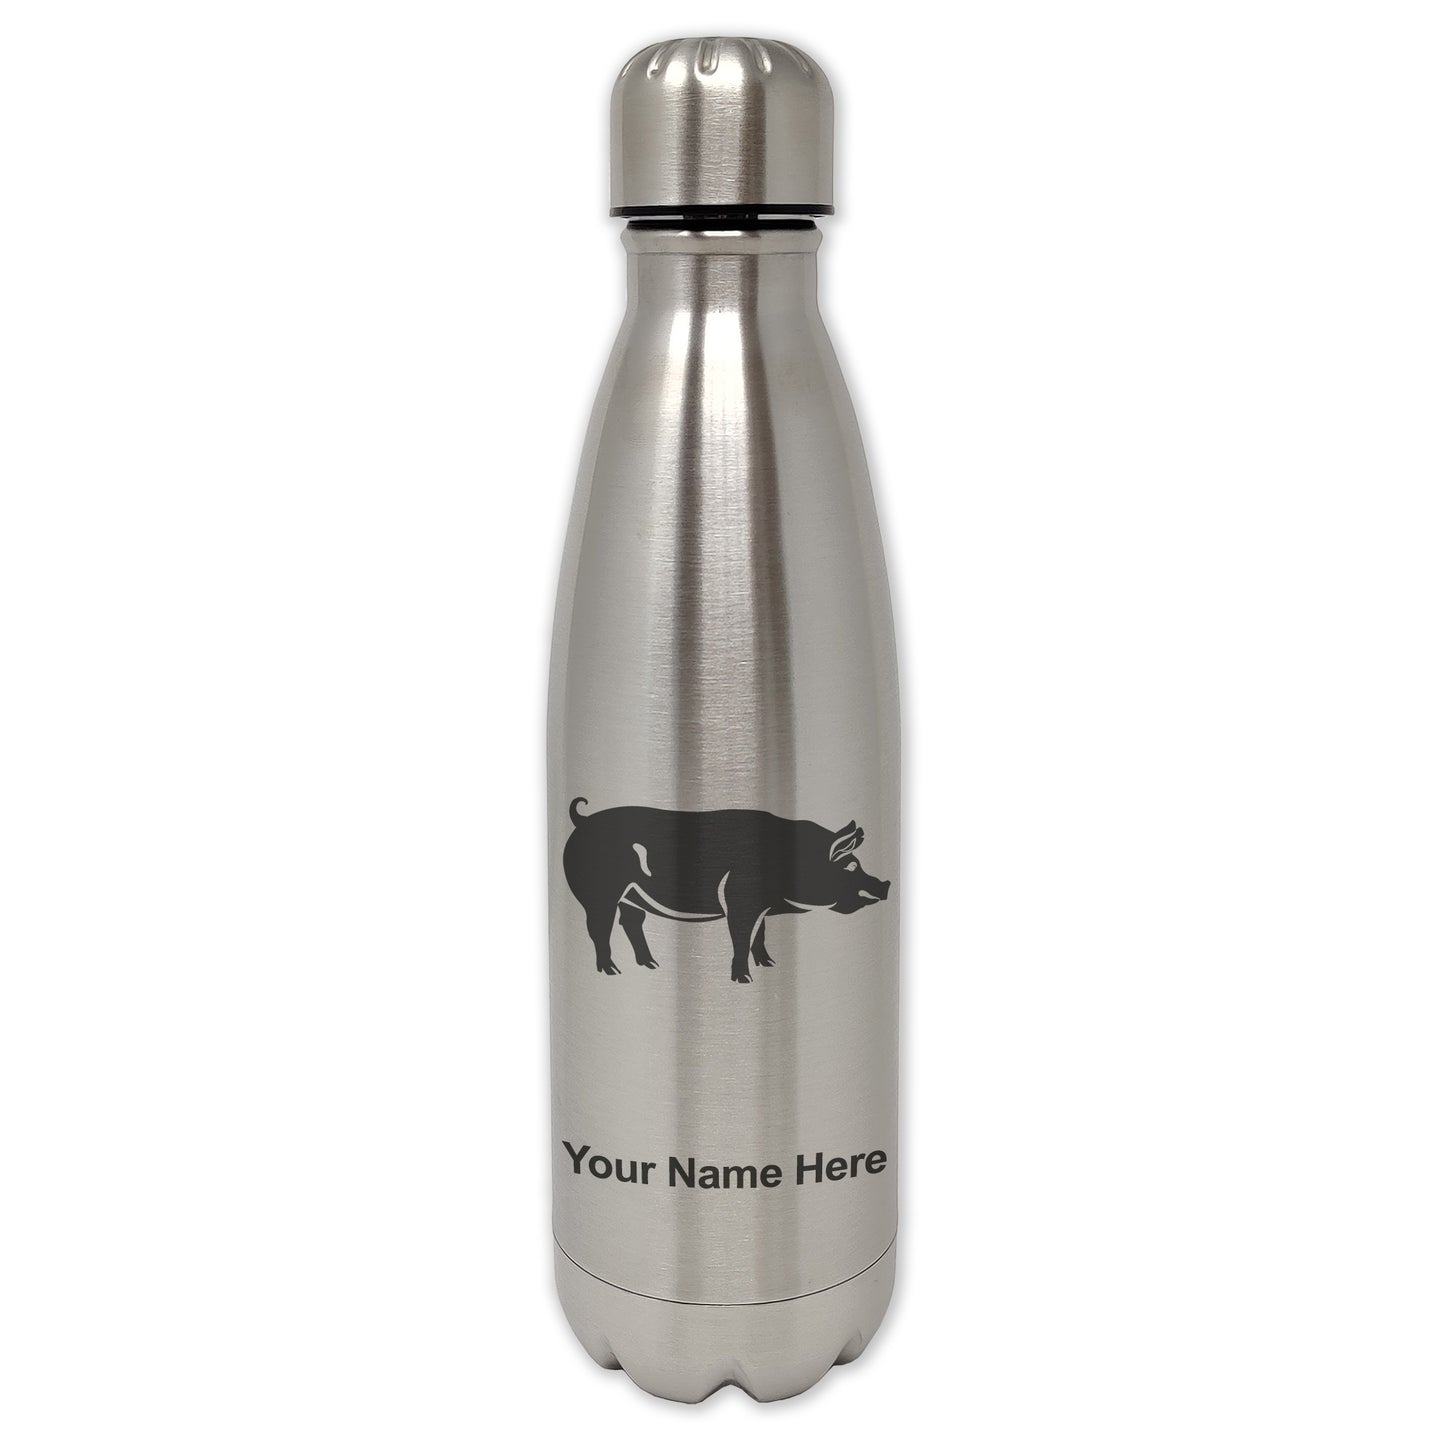 LaserGram Single Wall Water Bottle, Pig, Personalized Engraving Included